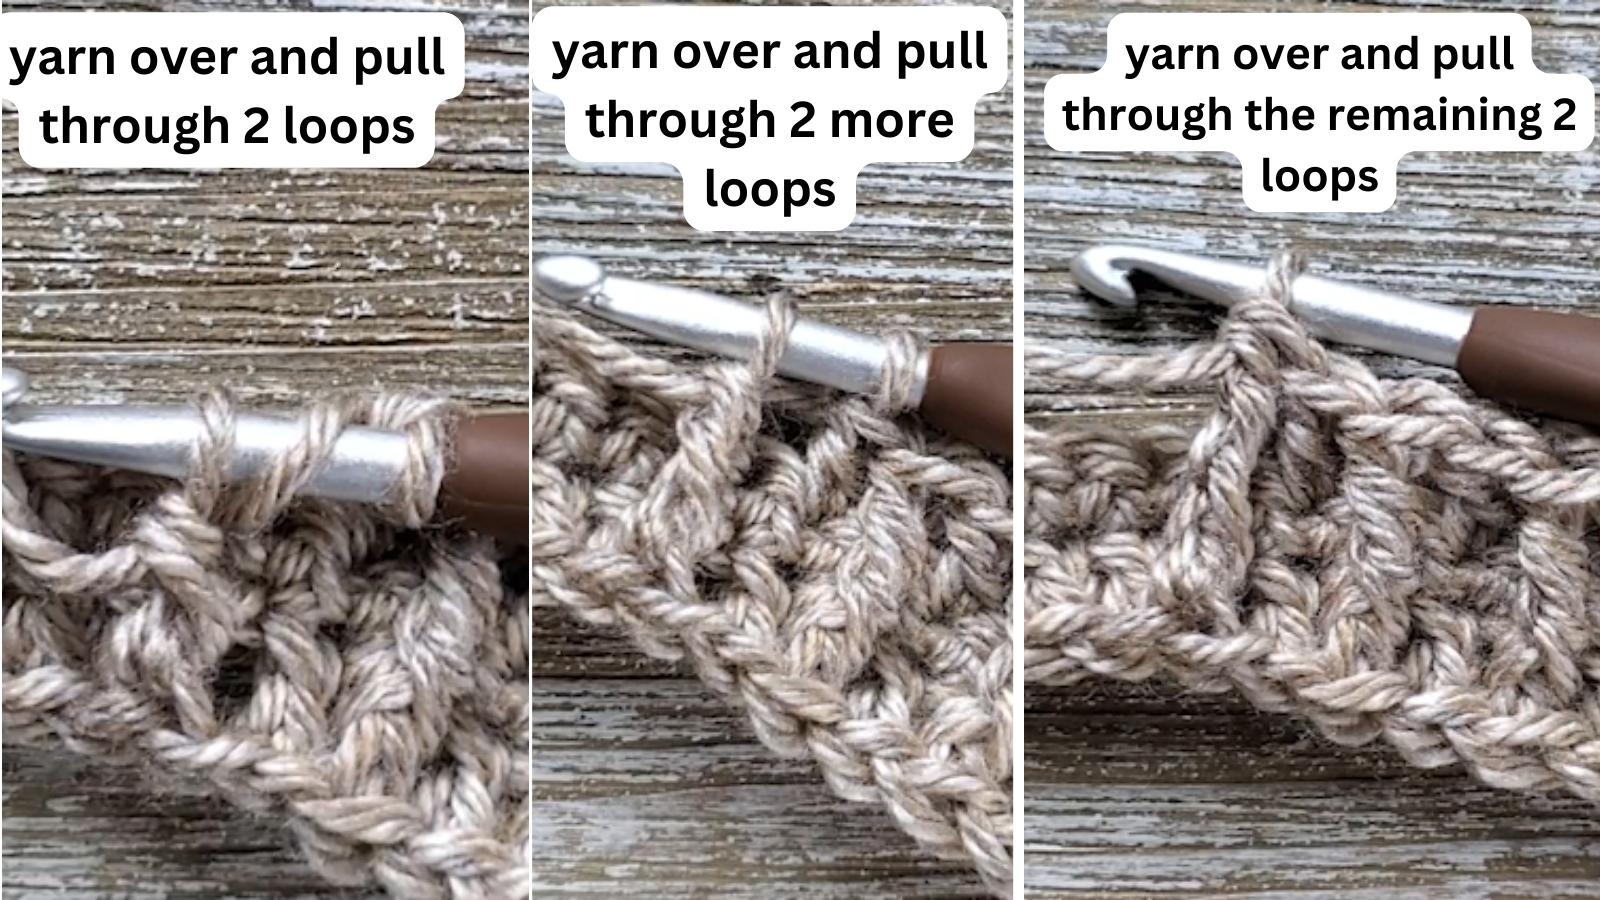 Front Post Triple Crochet Part 3: yarn over and pull through 2 loops 3 times until only 1 loop is left on your hook.